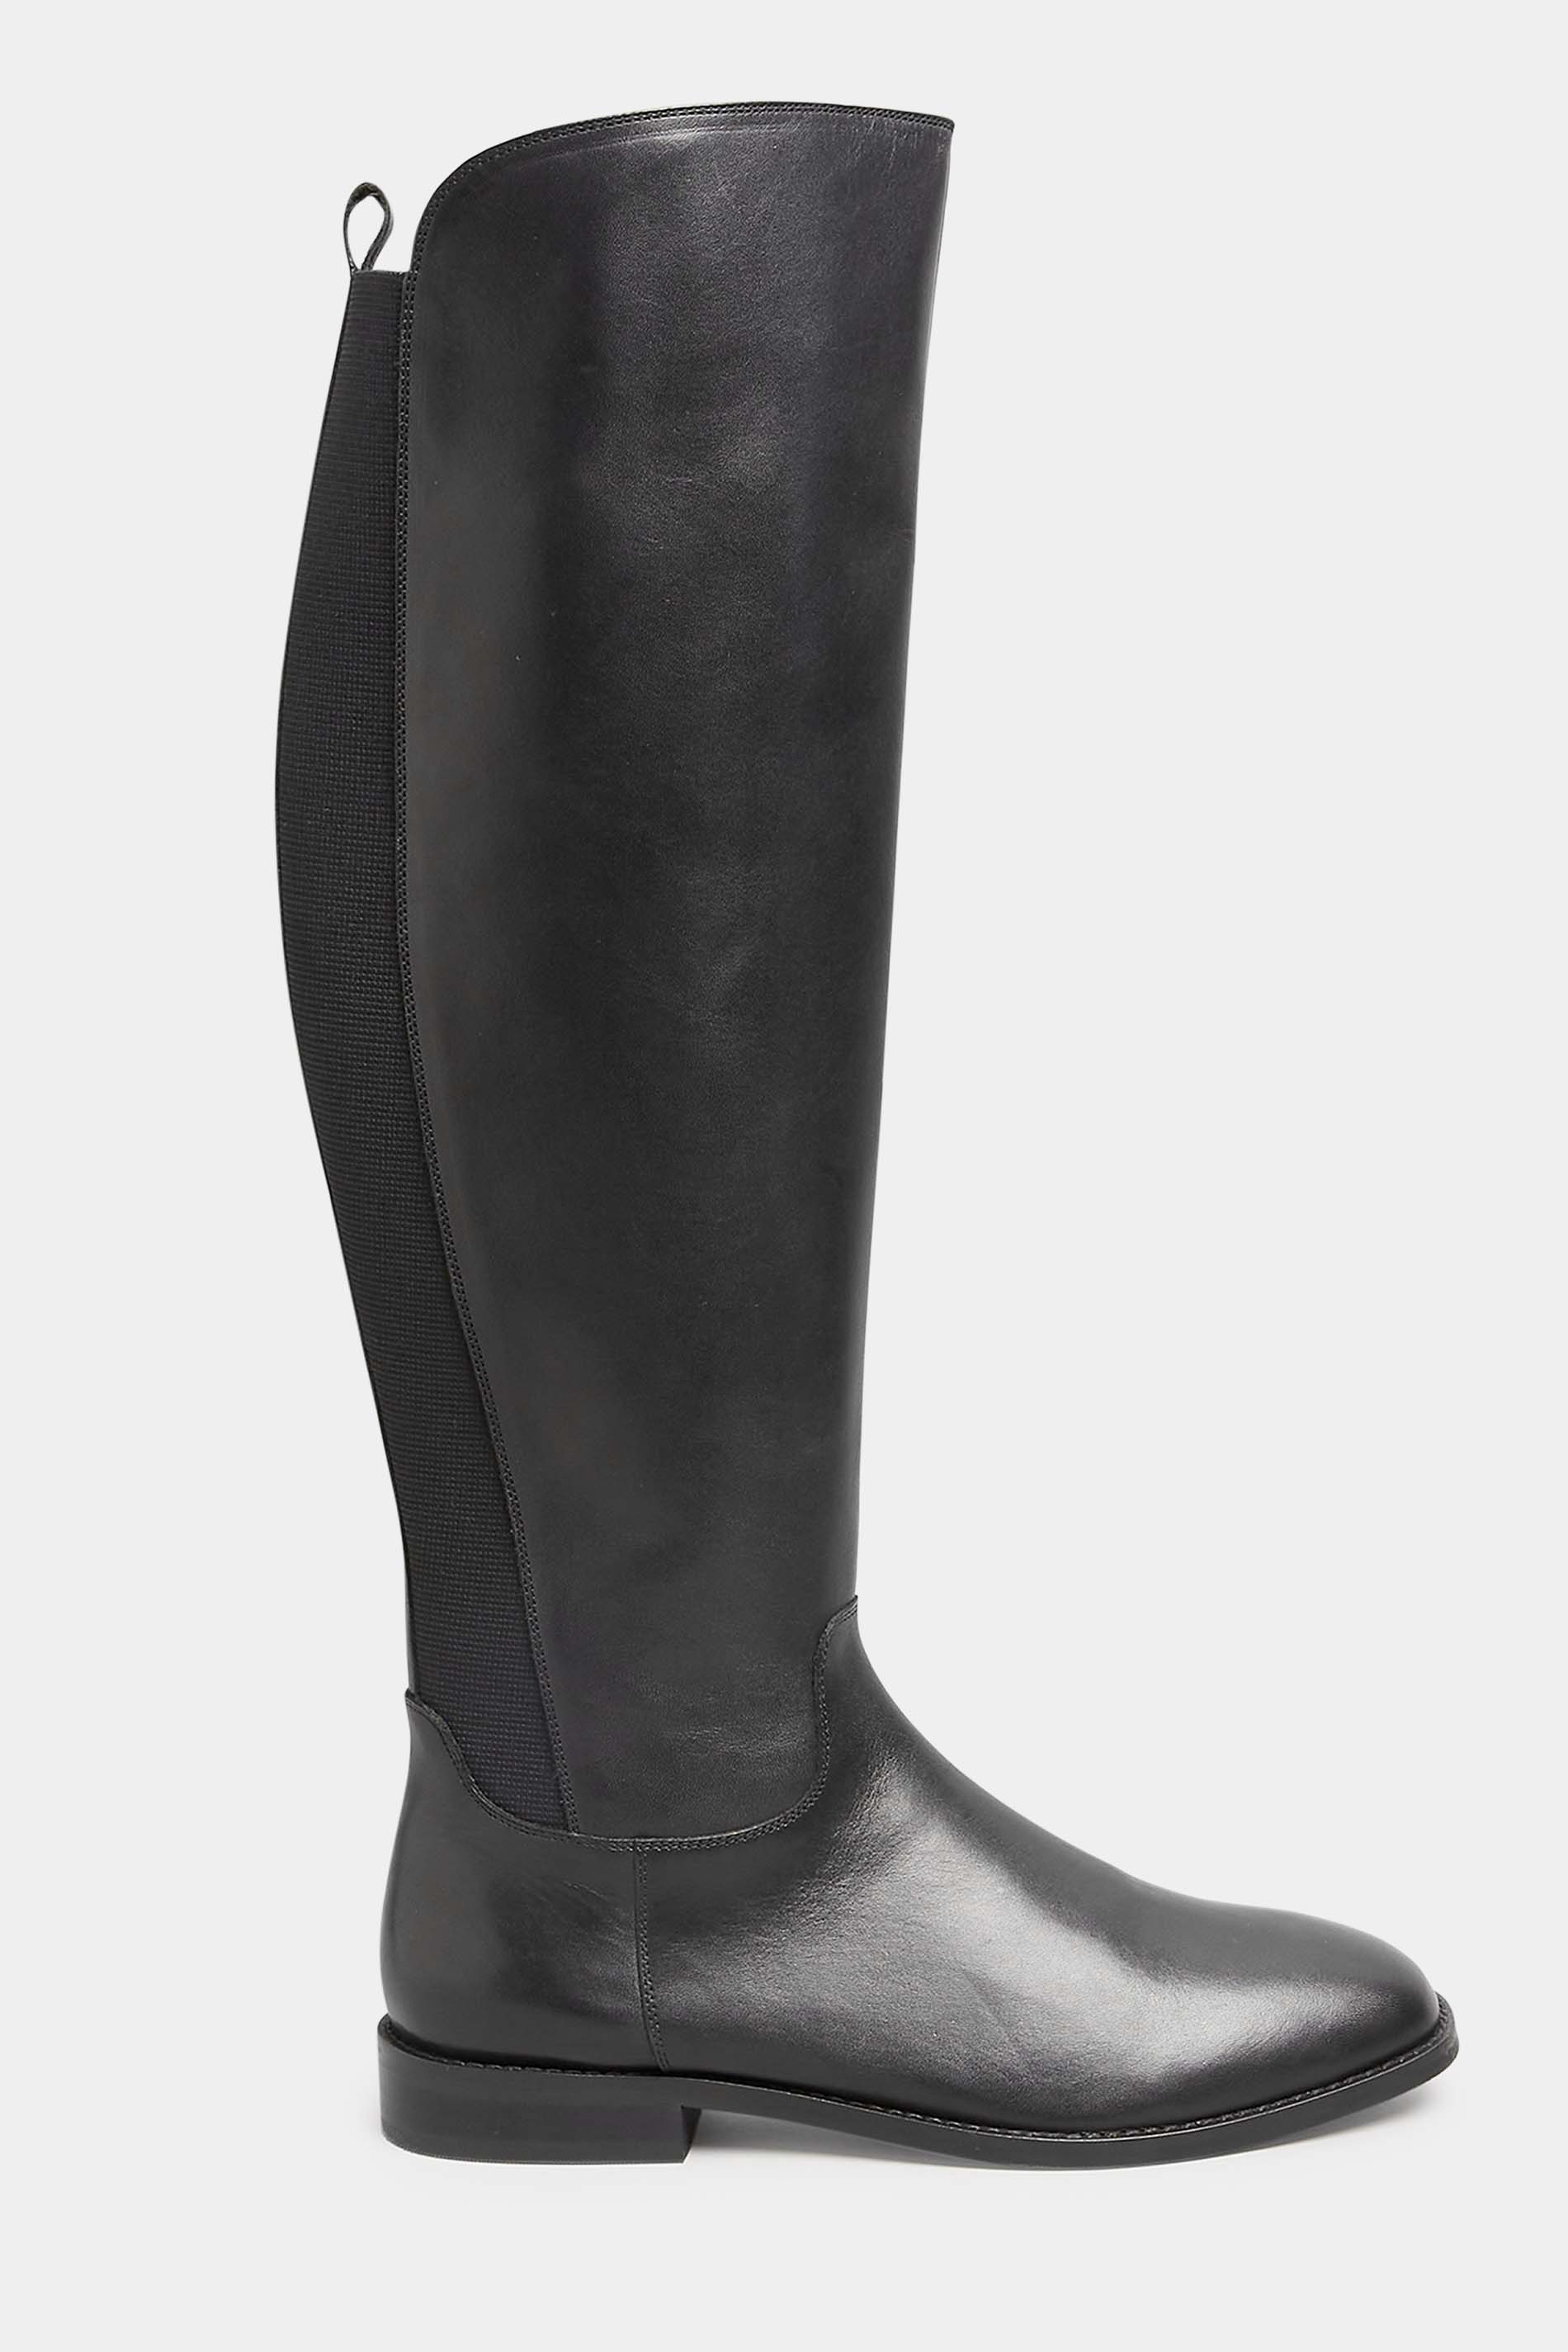 LTS Black Leather Knee High Boots In Standard Fit | Long Tall Sally 3